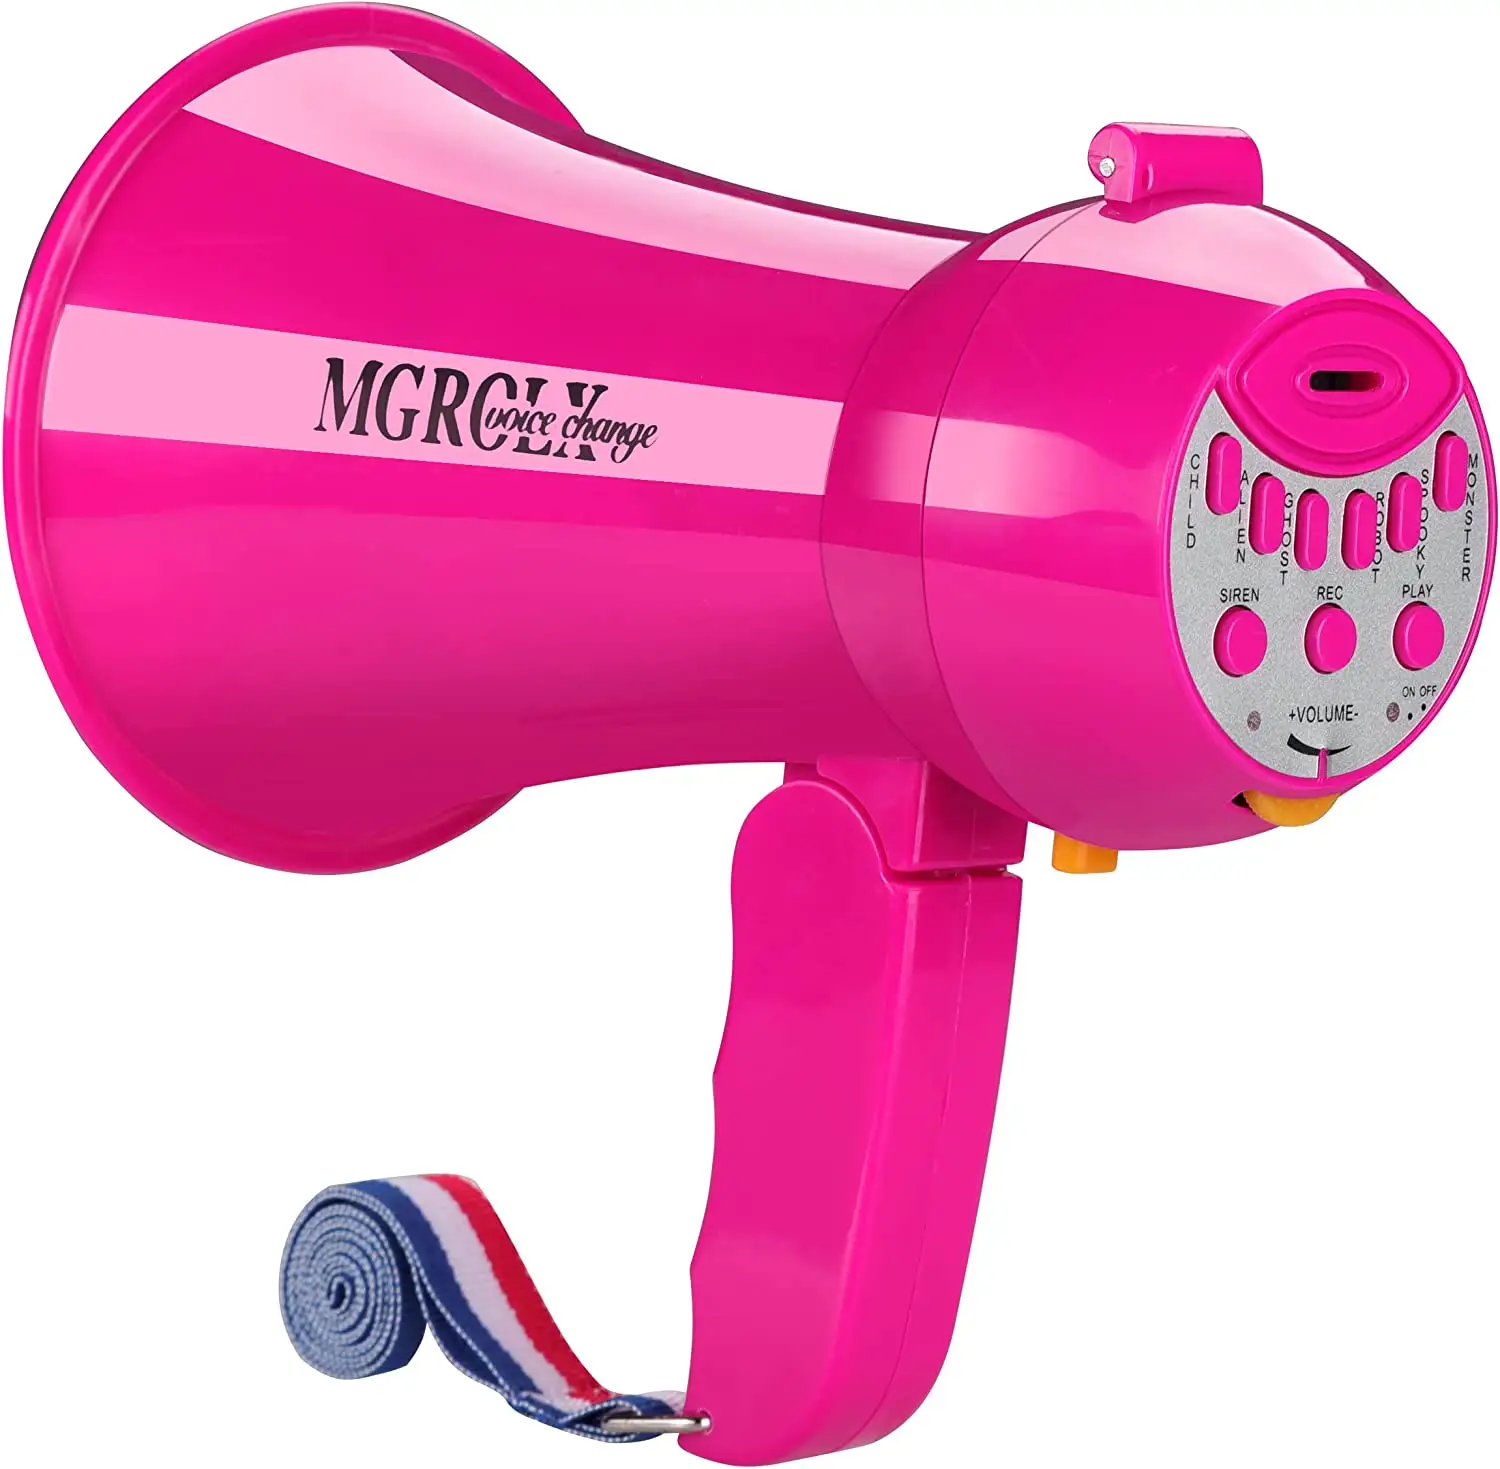 Mini Megaphone Bullhorn with 6 Sound Effects Portable Loud Speaker and Voice Changer Function Built-in Siren & Record